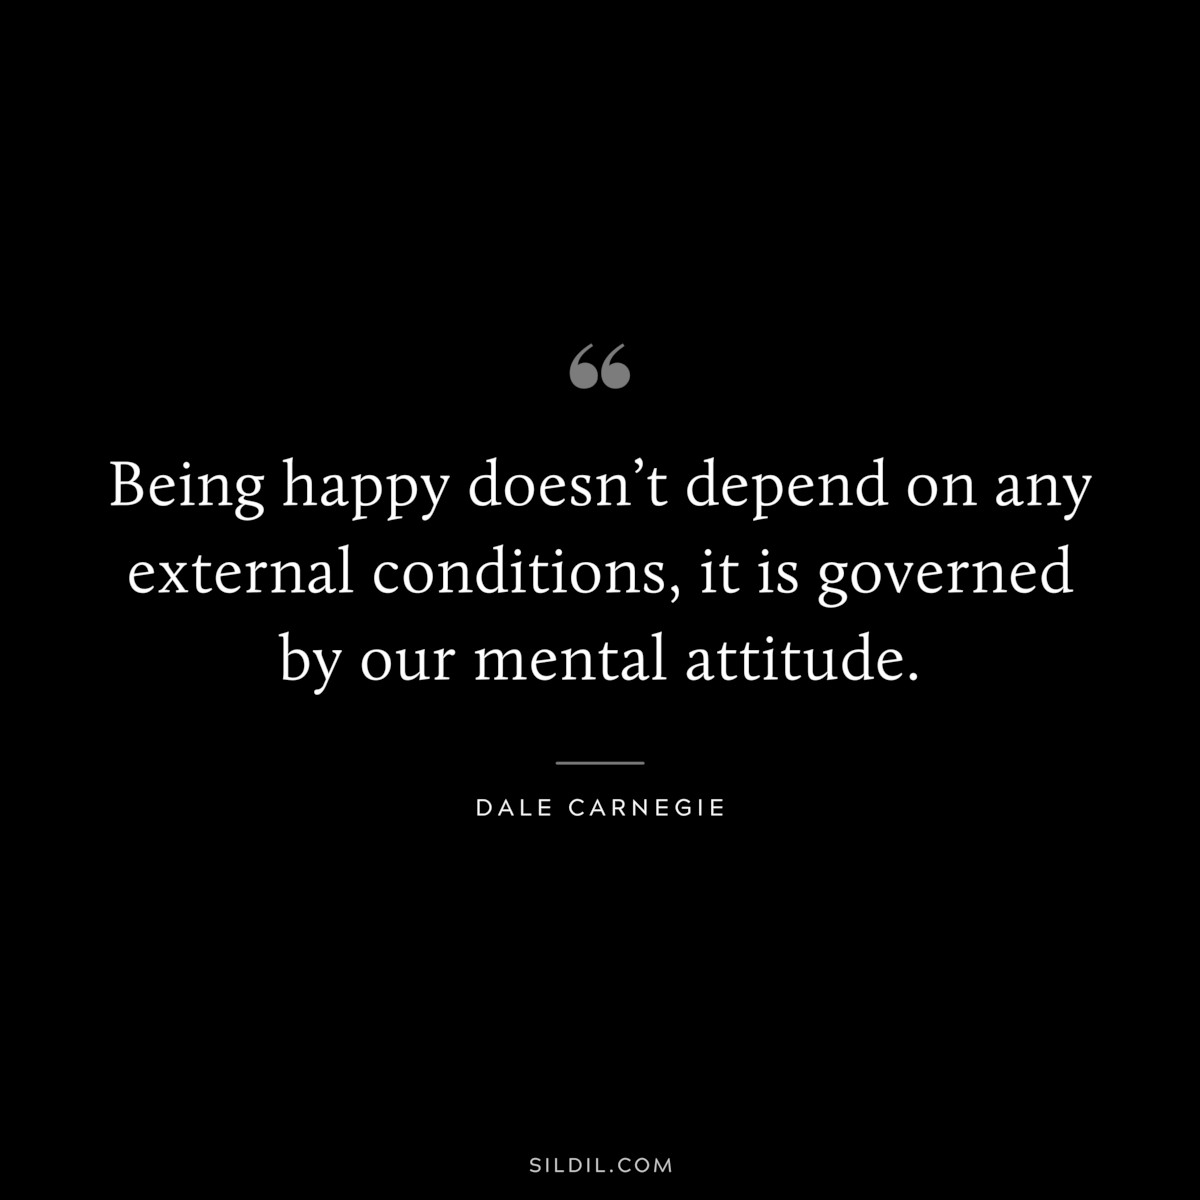 Being happy doesn’t depend on any external conditions, it is governed by our mental attitude. ― Dale Carnegie